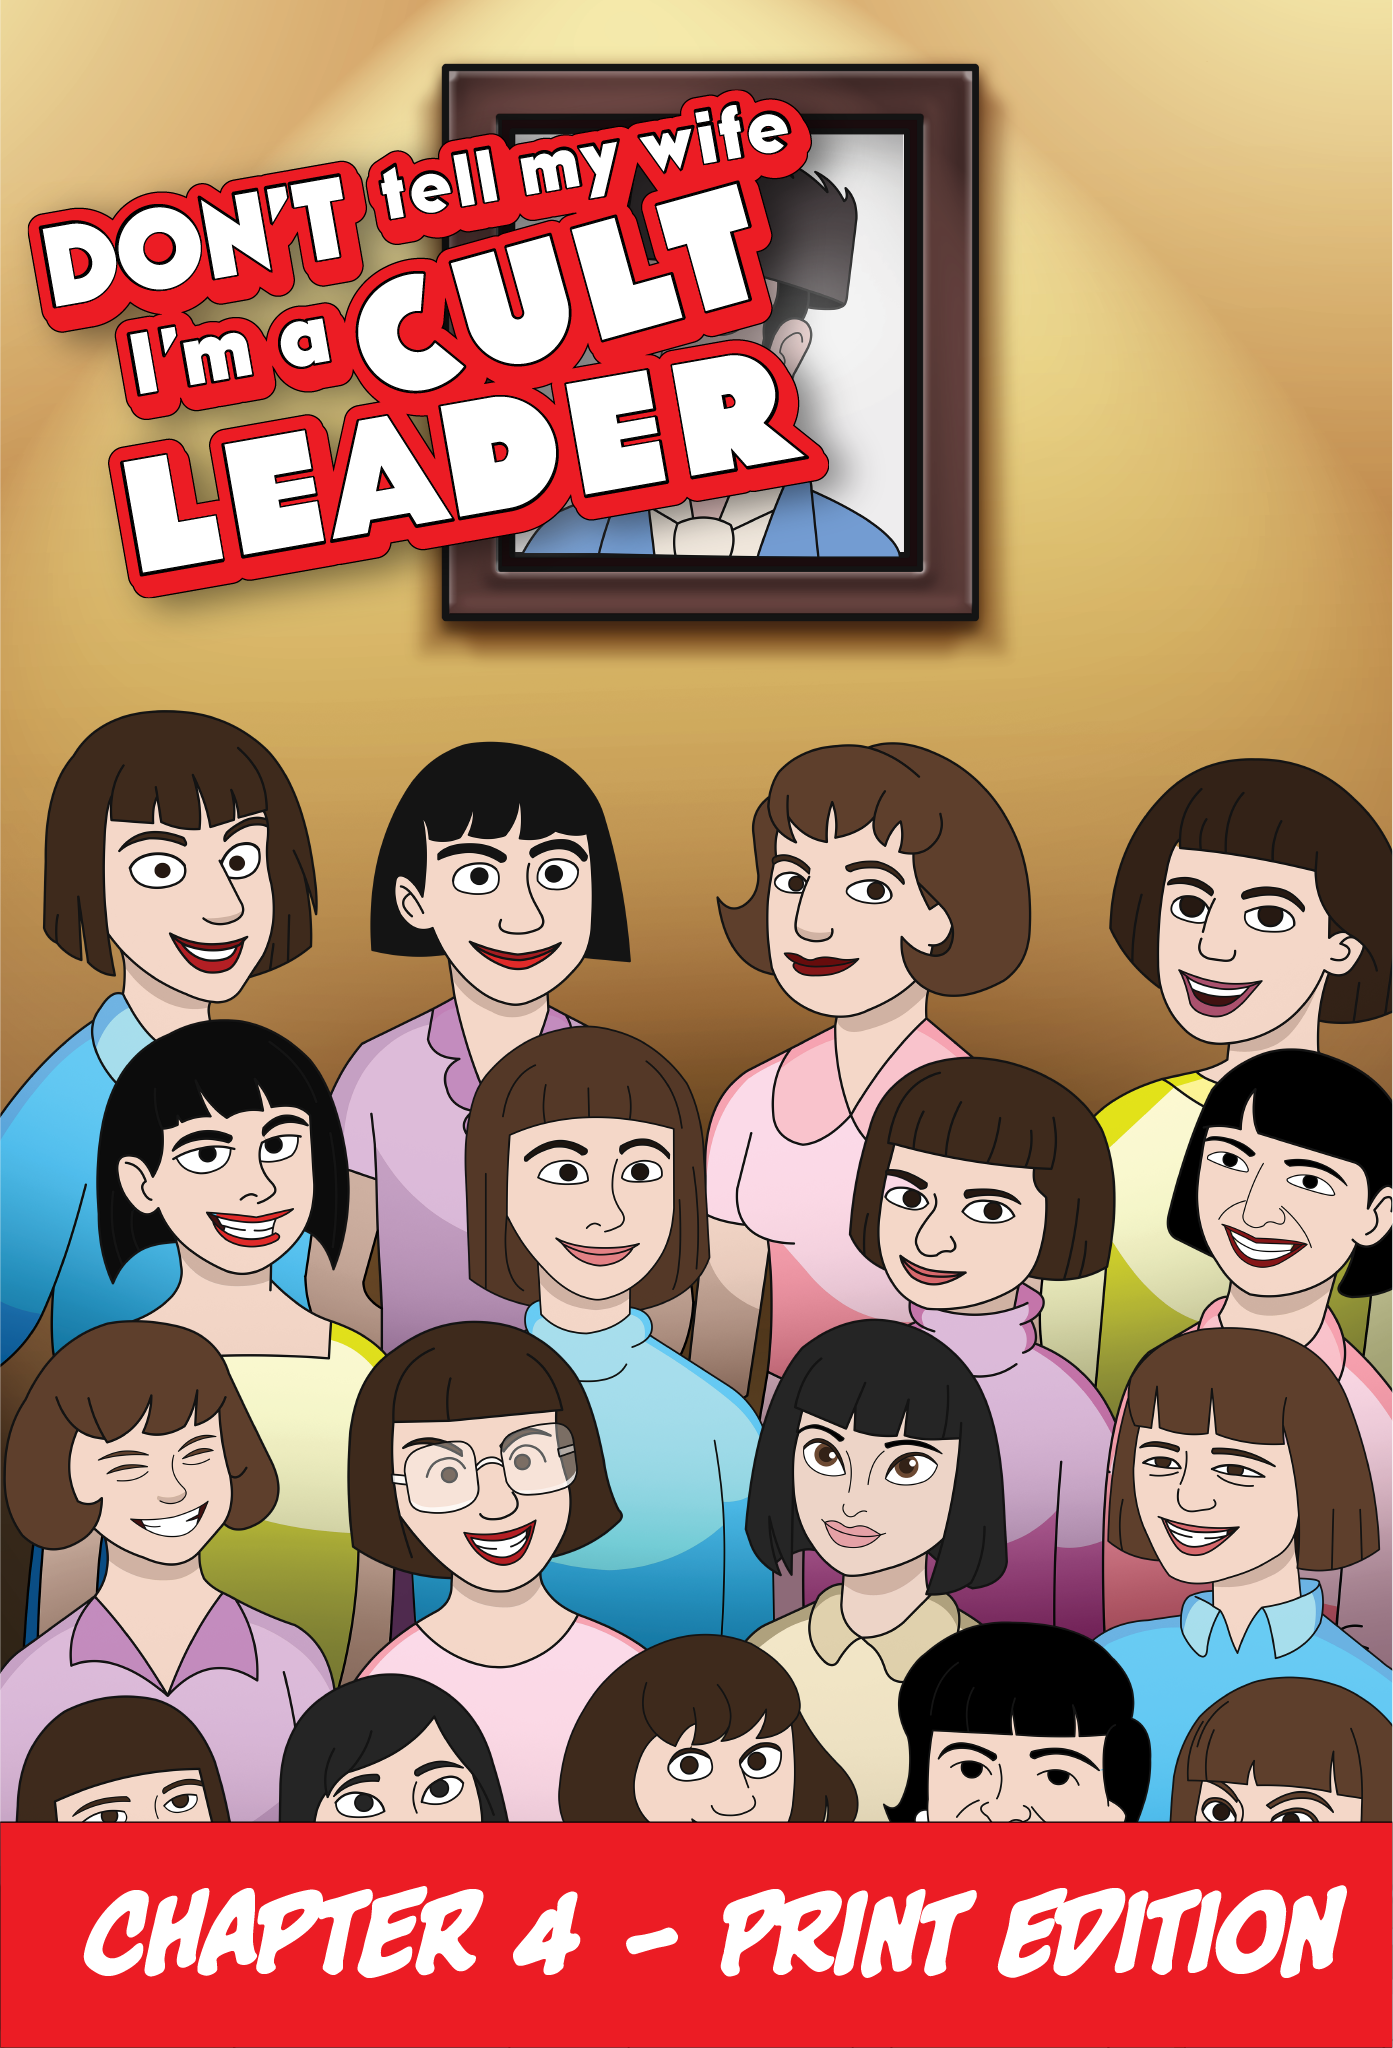 Main image of Chapter 4 of Don't Tell My Wife I'm a Cult Leader, where we see a bunch of women below a portrait of a man with a funny hat. This picture is for the print edition.